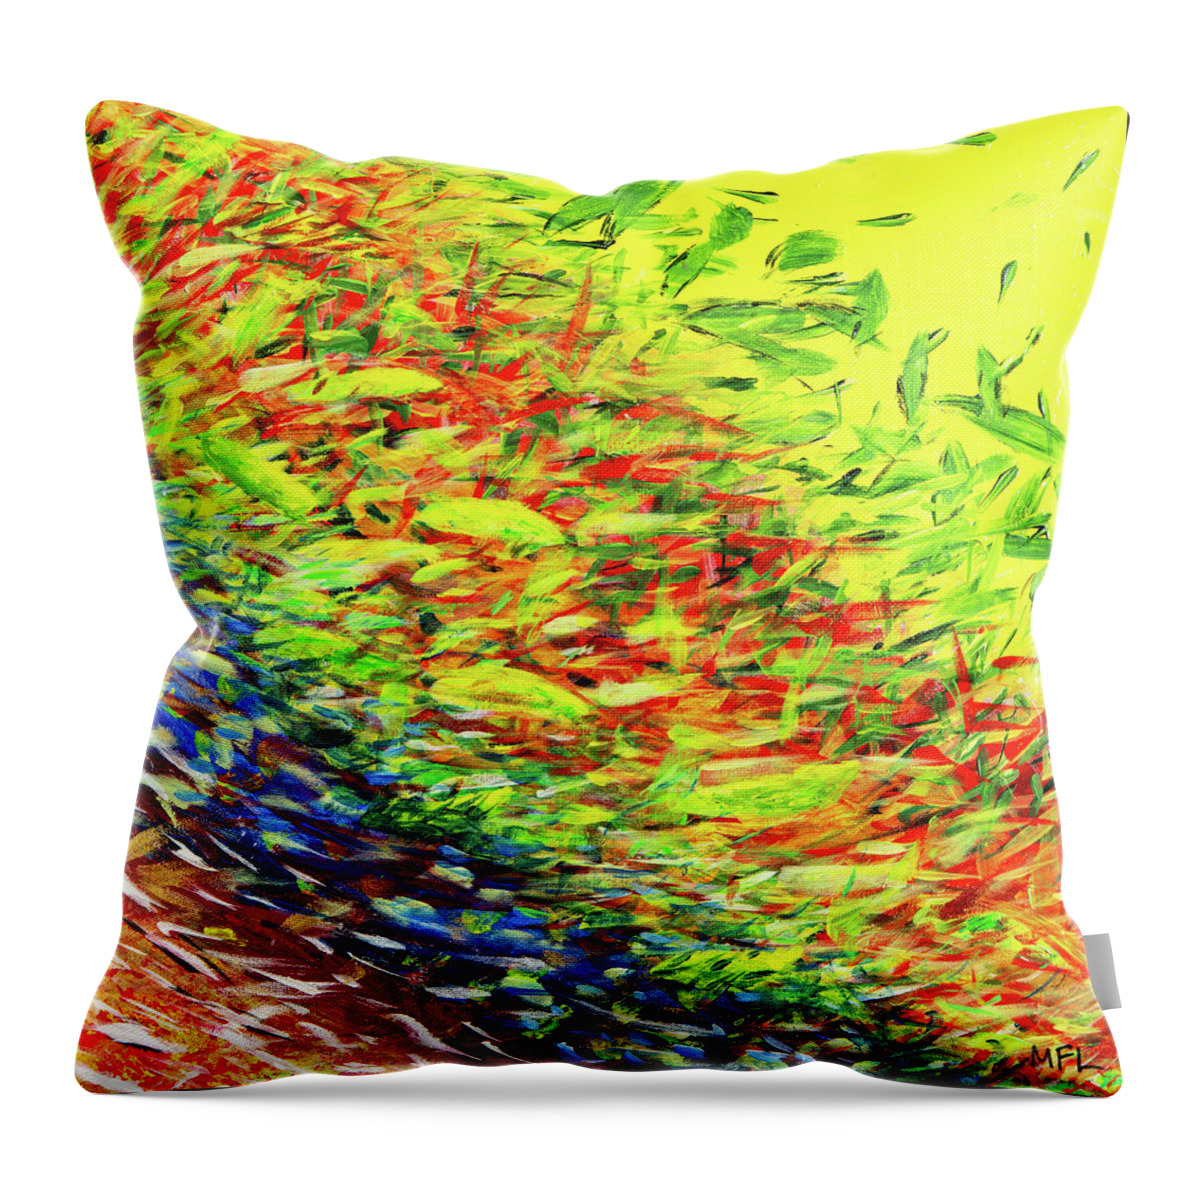  Throw Pillow featuring the painting The Gathering by Mark Lyons